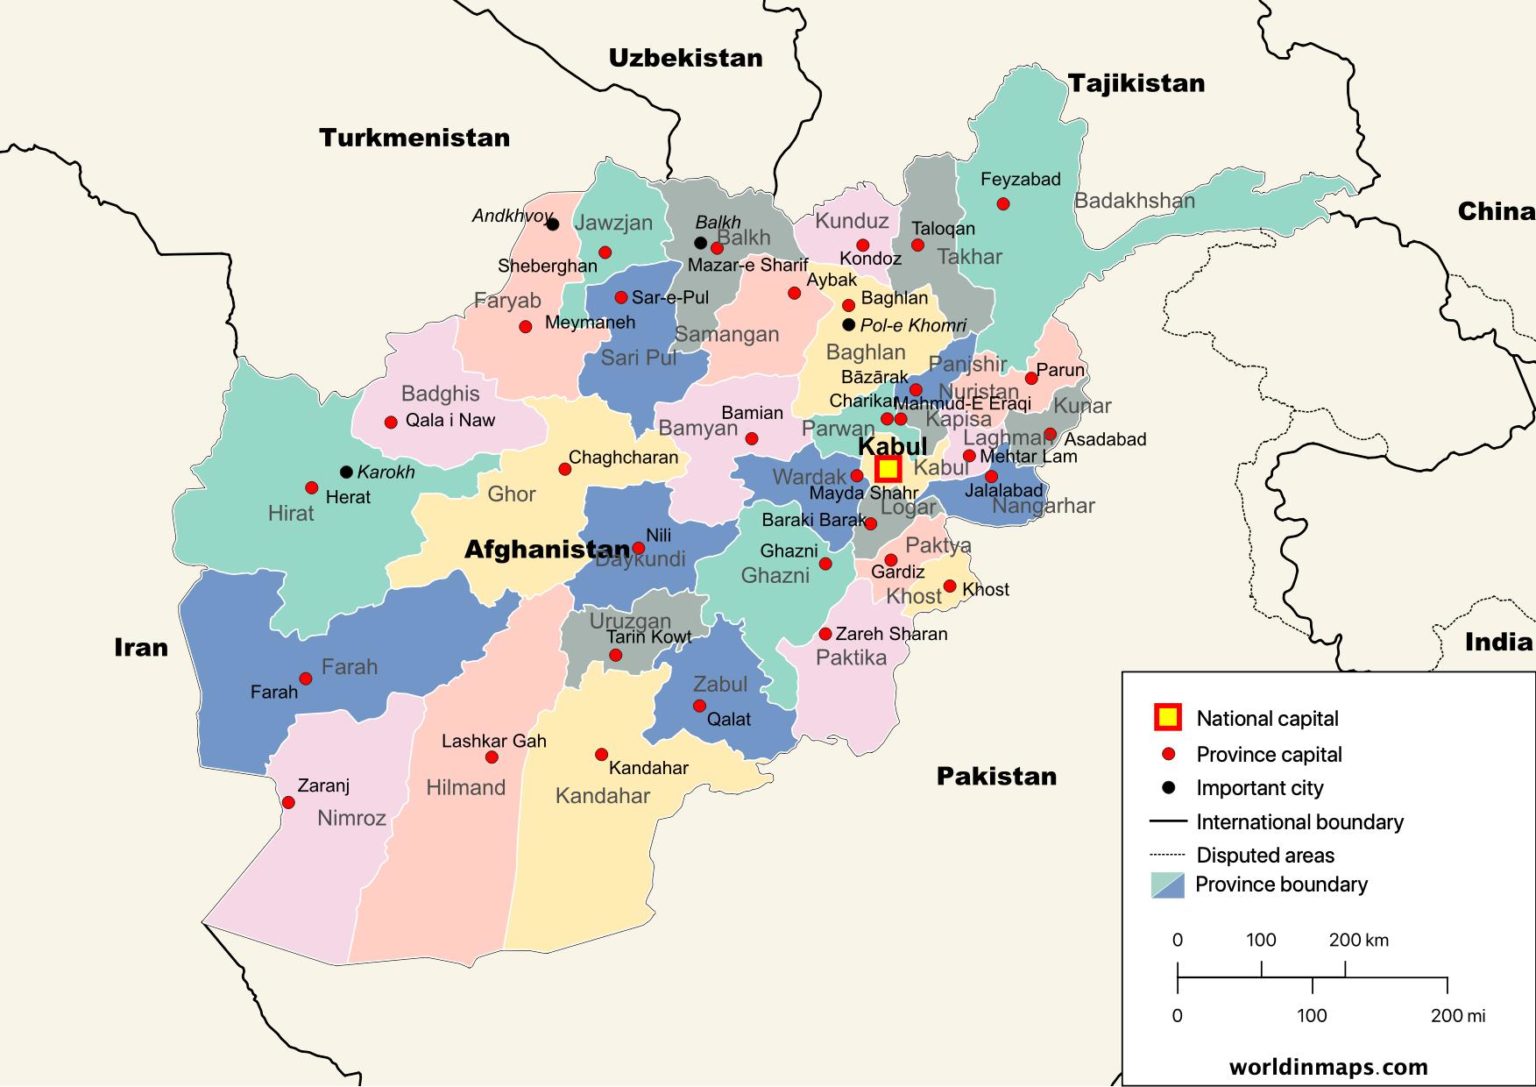 Afghanistan map and data - World in maps